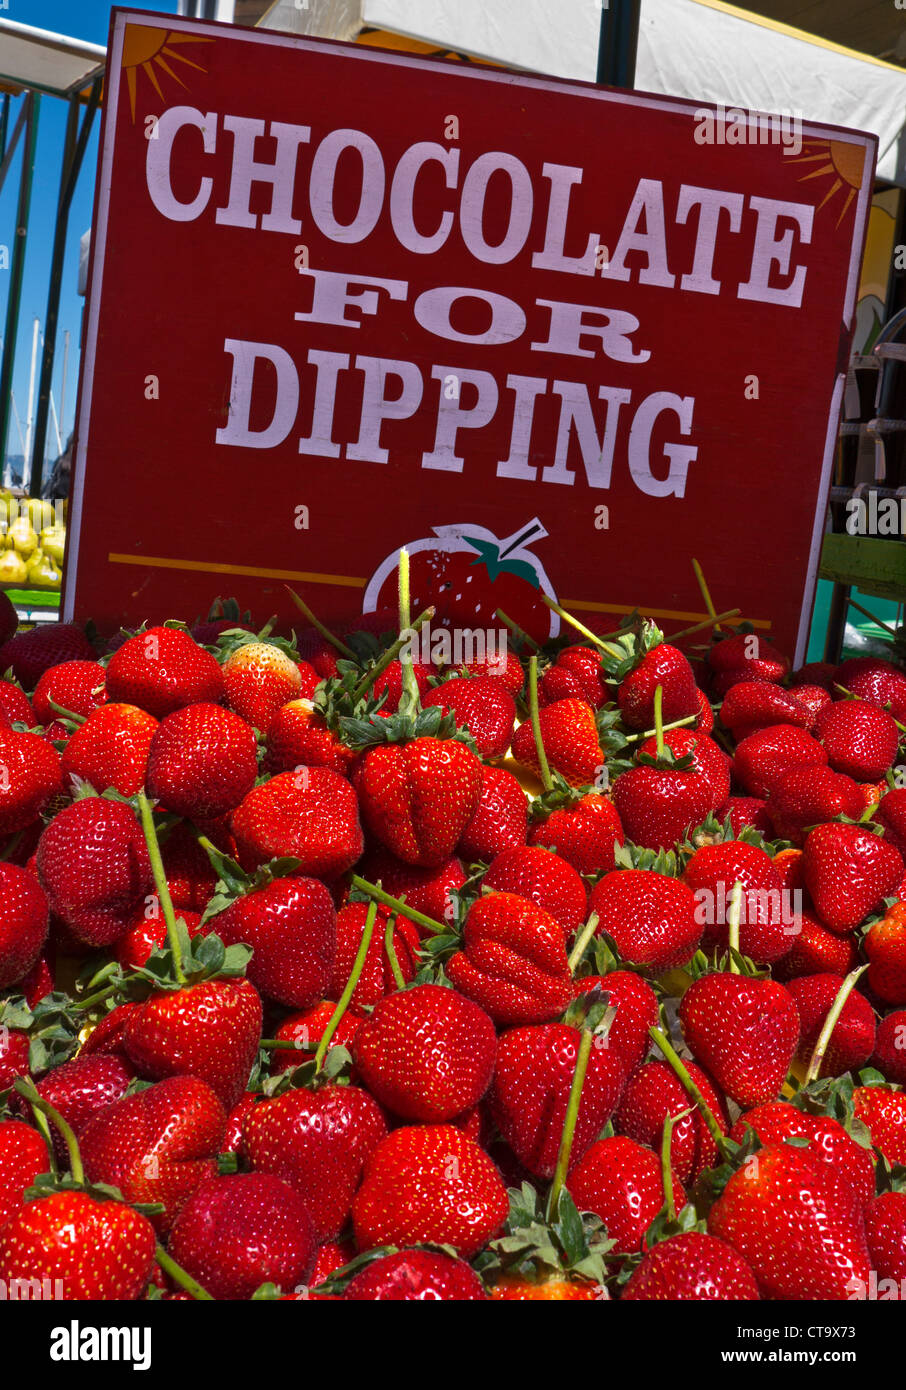 Ripe long stalk strawberries on display farmers market stall ready for chocolate dipping Embarcadero San Francisco USA Stock Photo